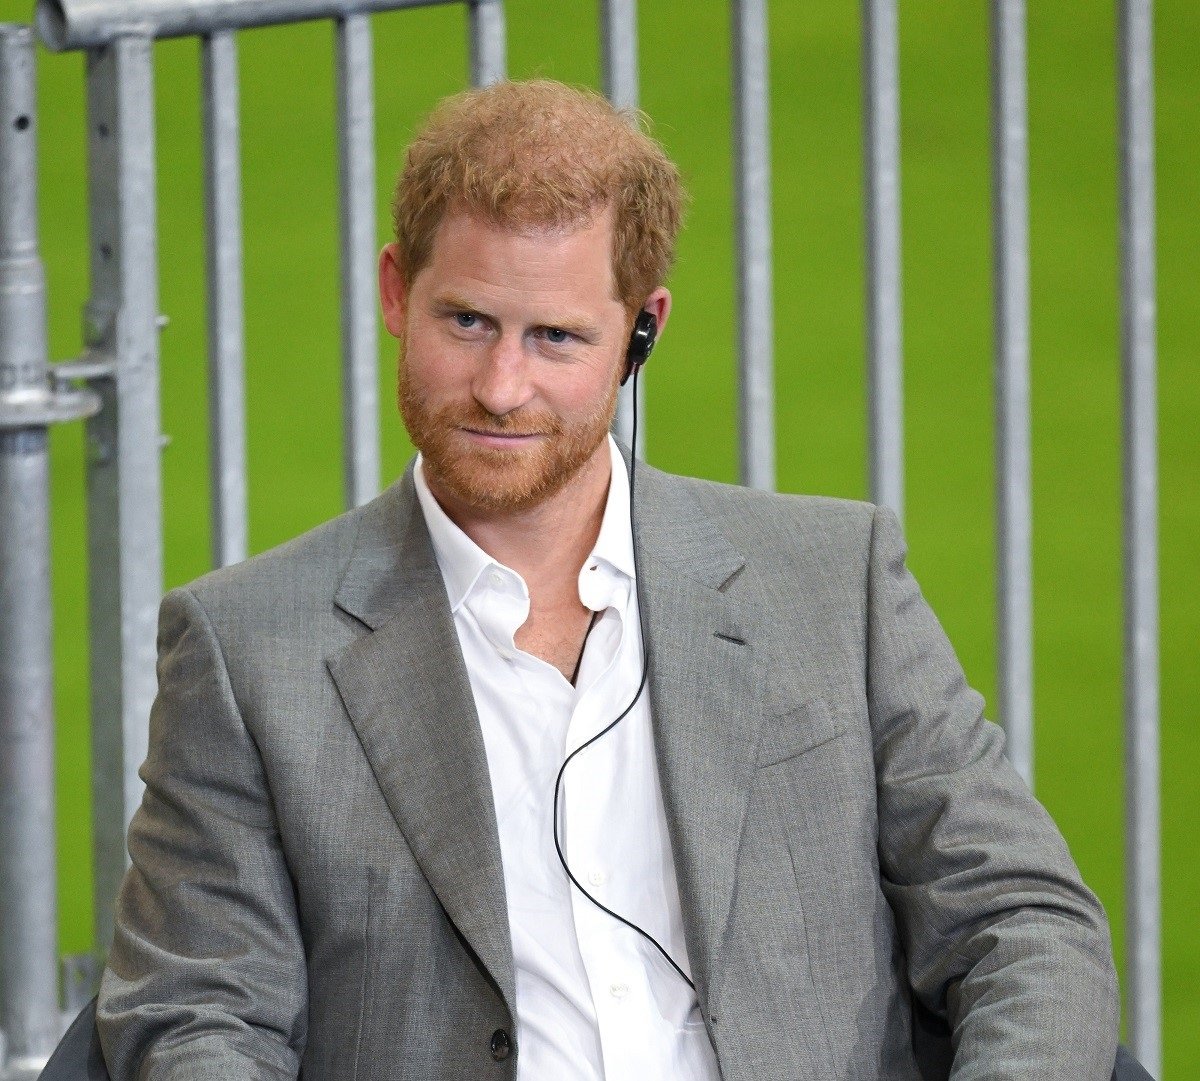 Prince Harry, who a body language expert said showed confidence during his speech in German, attends a press conference at the Merkur Spiel Arena in Dusseldorf